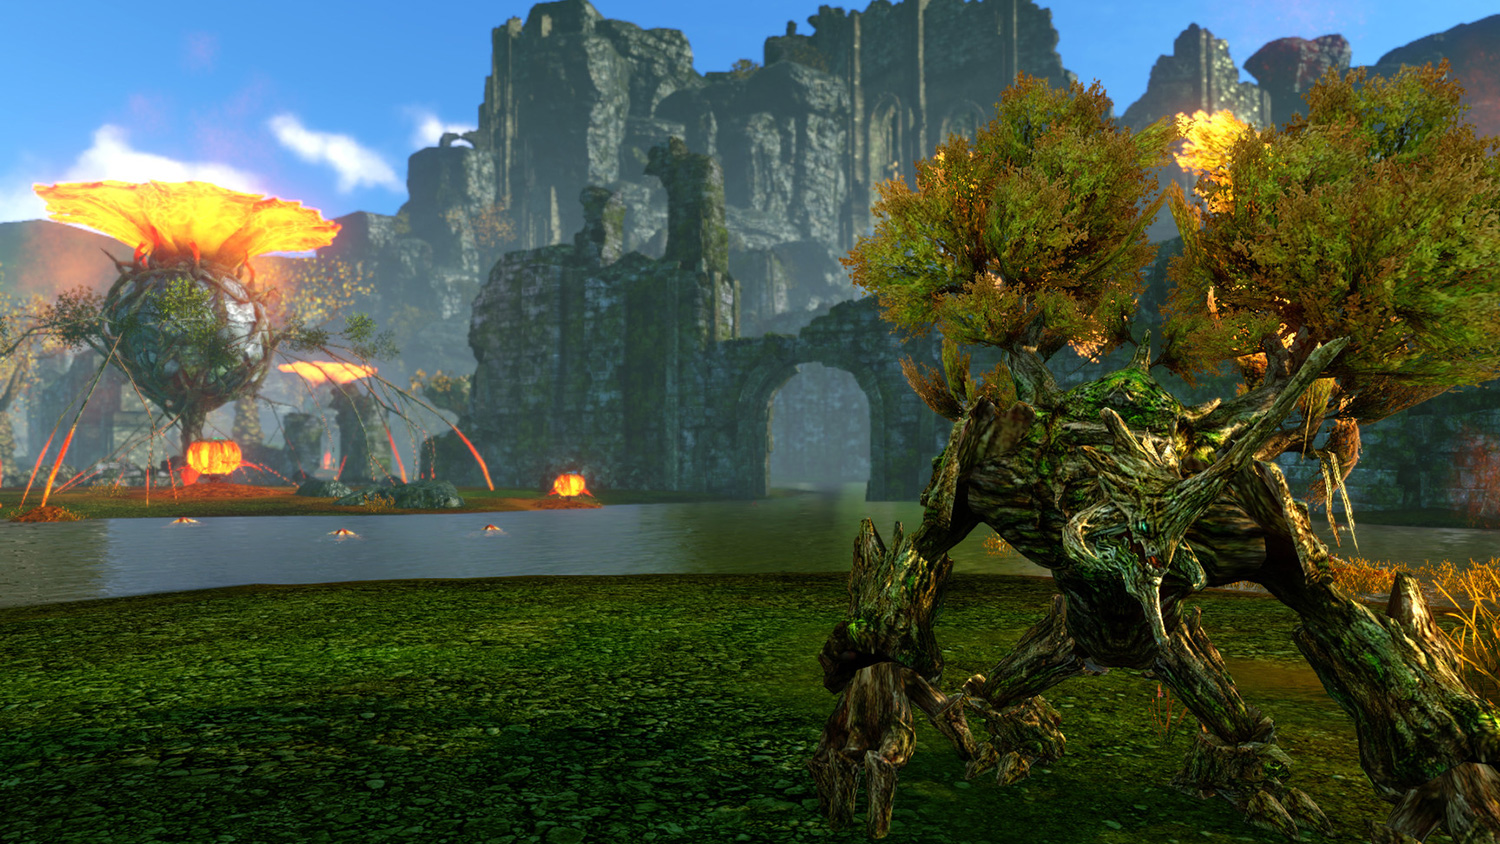 researchers use archeage mmorgp to study human behavior in end times screens 05